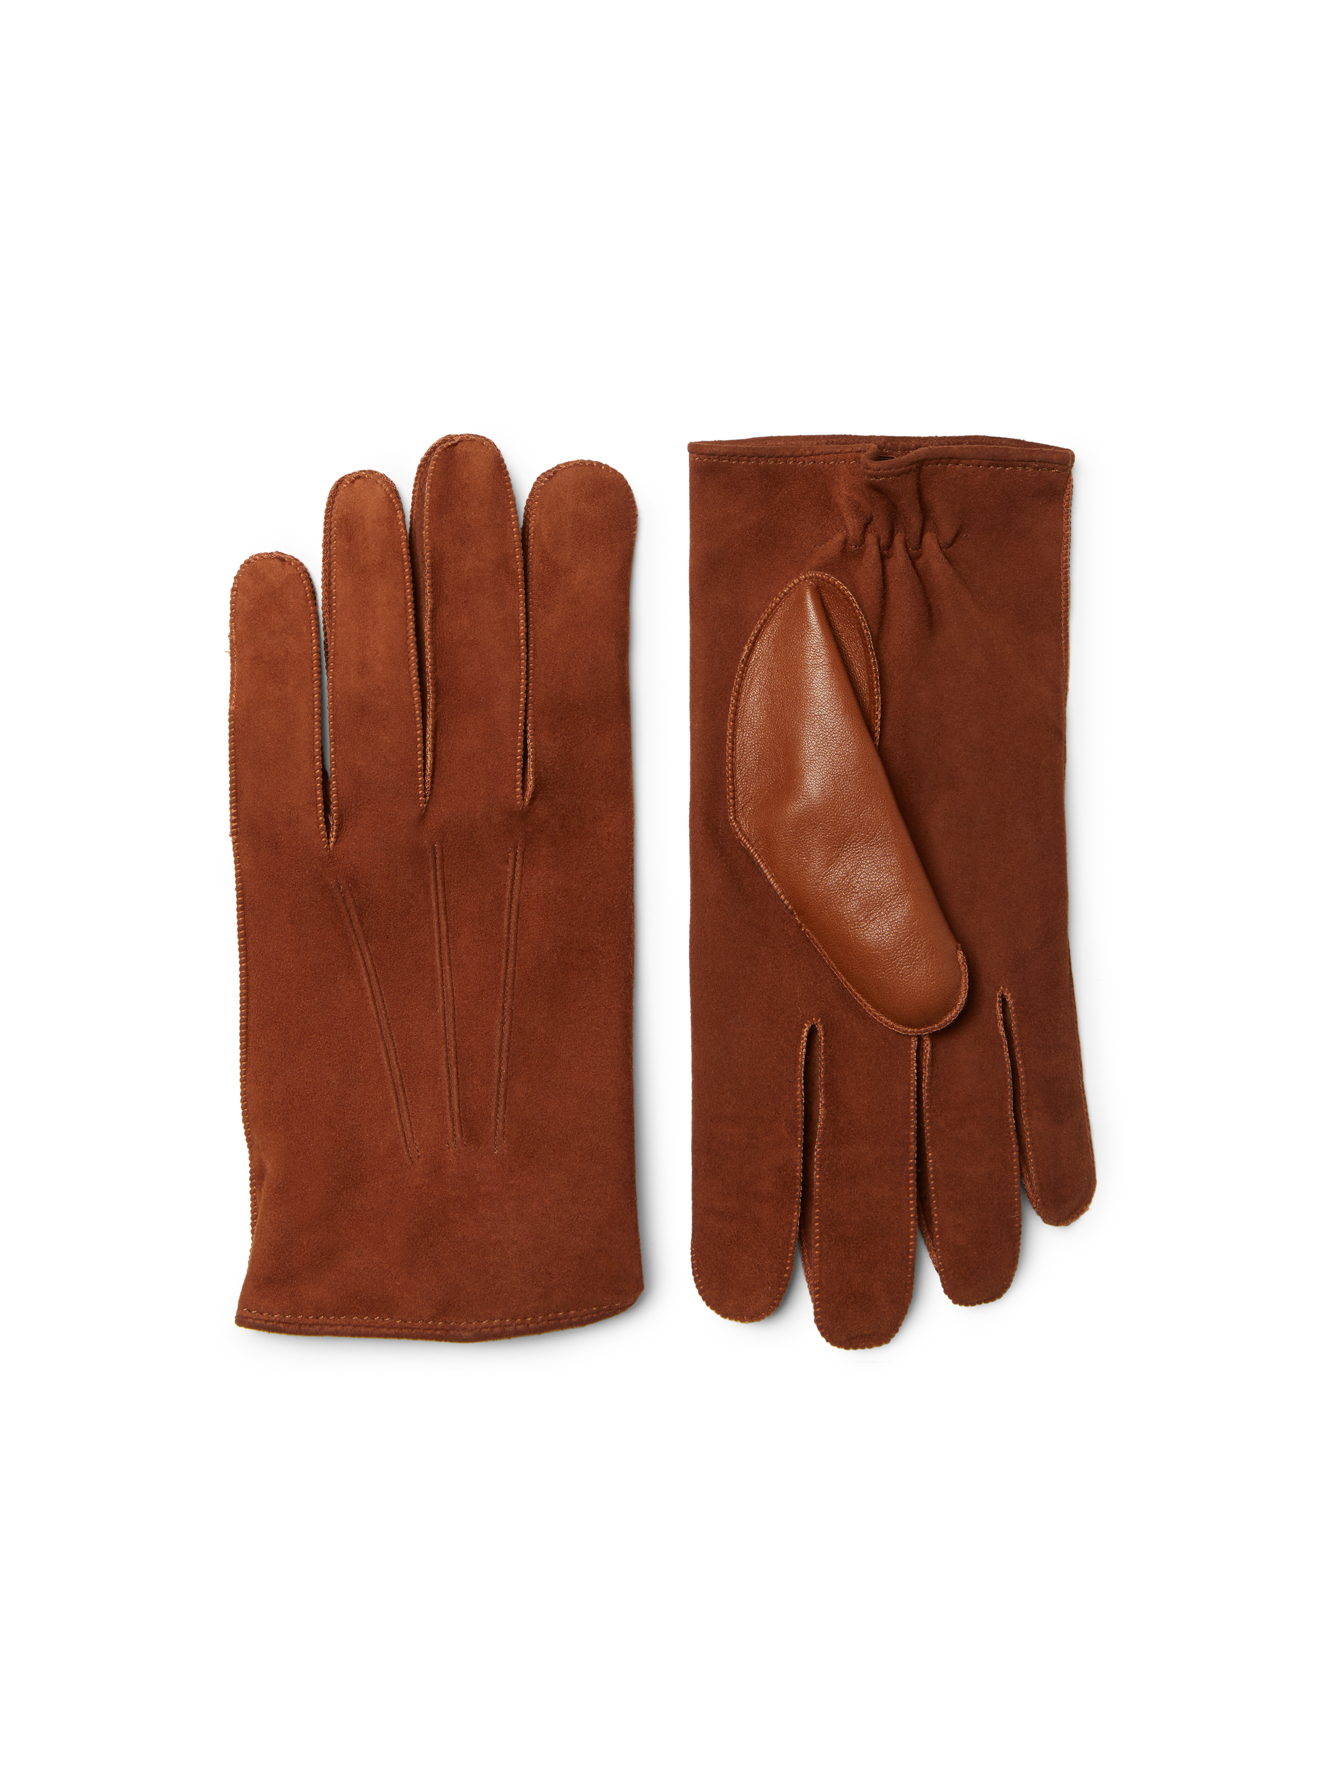 Vicuna Lamb Suede Gloves £375 